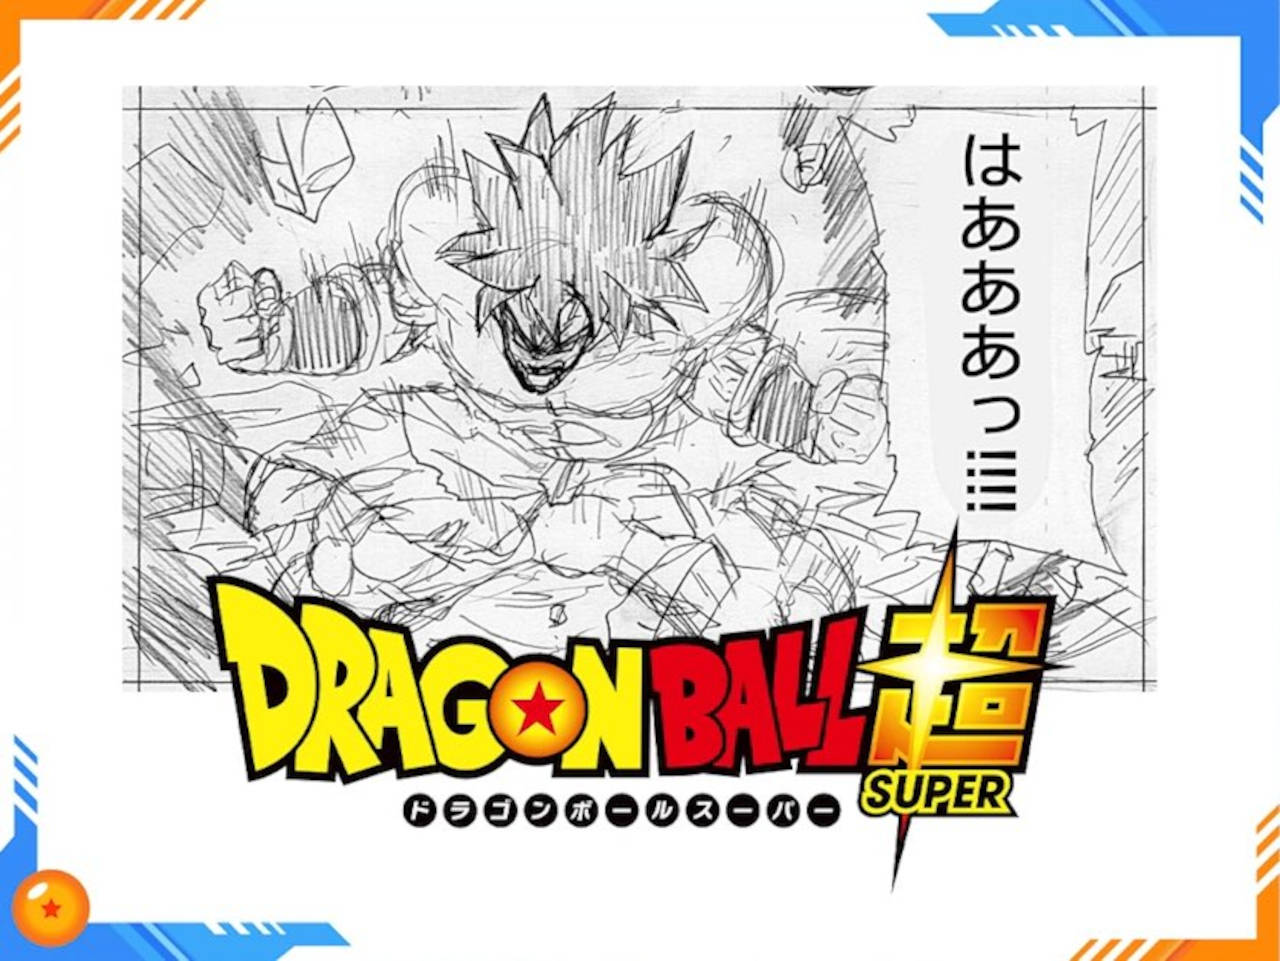 Dragon Ball Super Reveals What Broly Looks Like Controlling His Berserker State